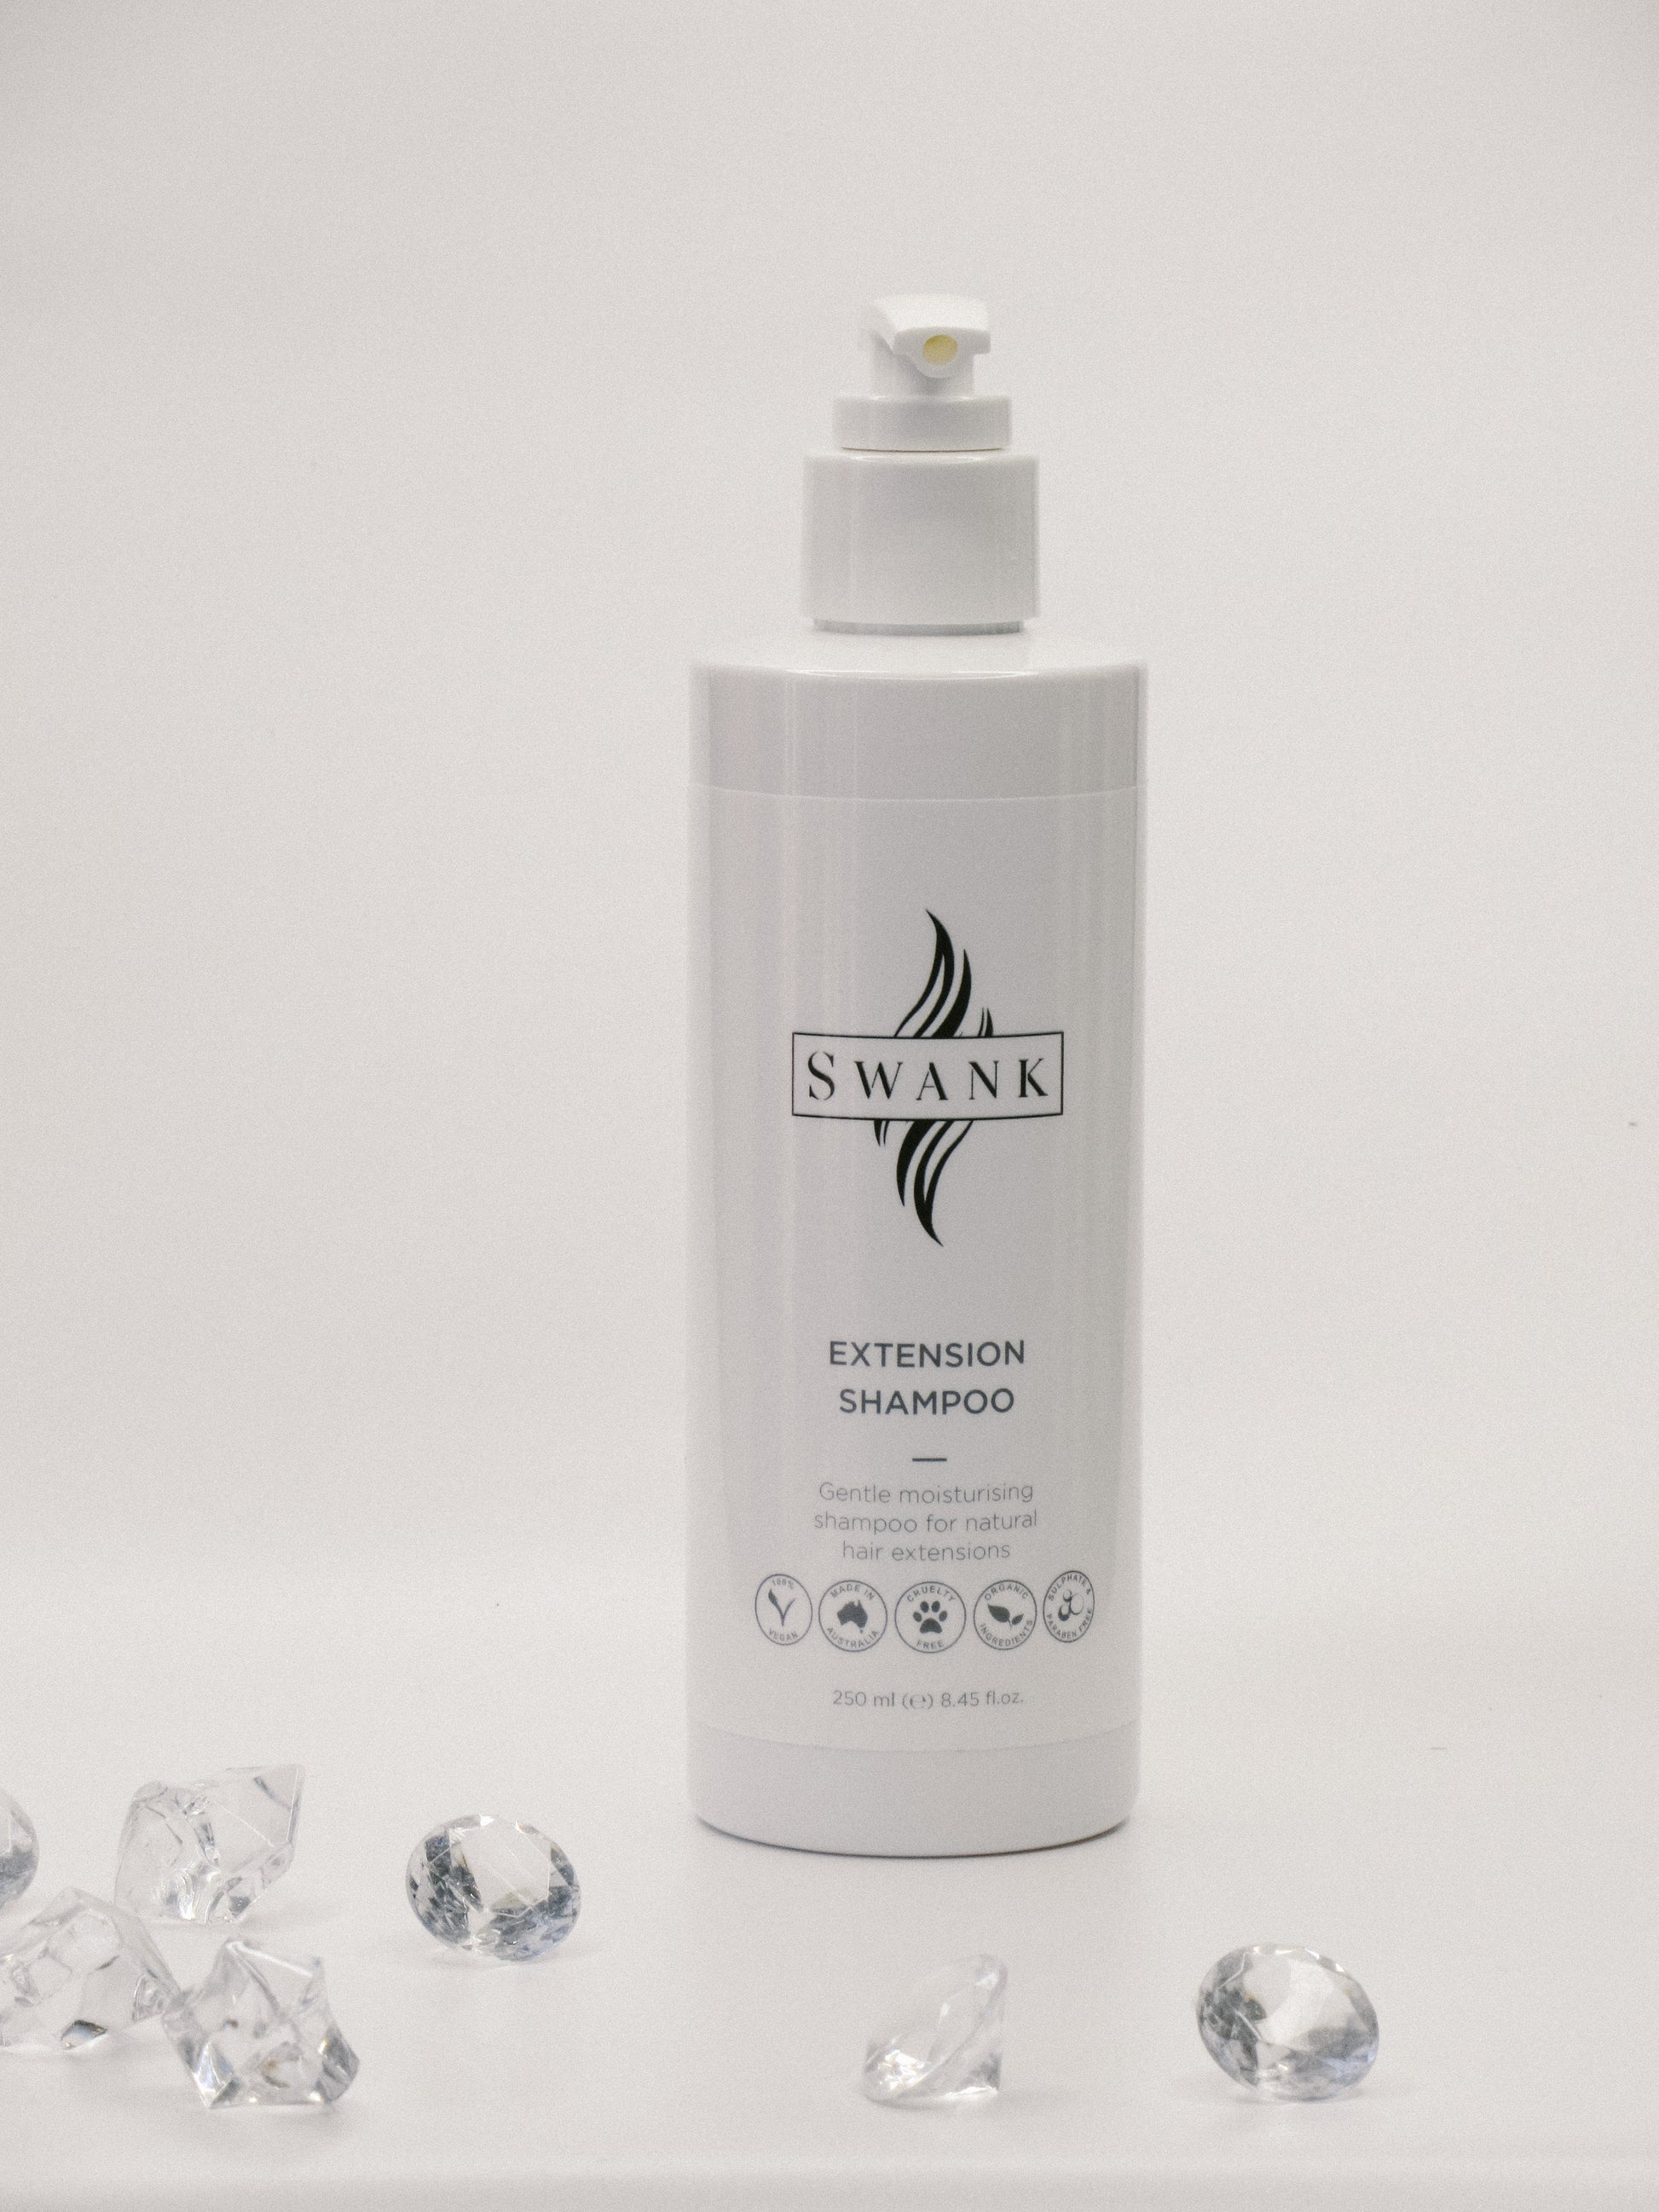 Swank Extensions Shampoo Swank hair collections